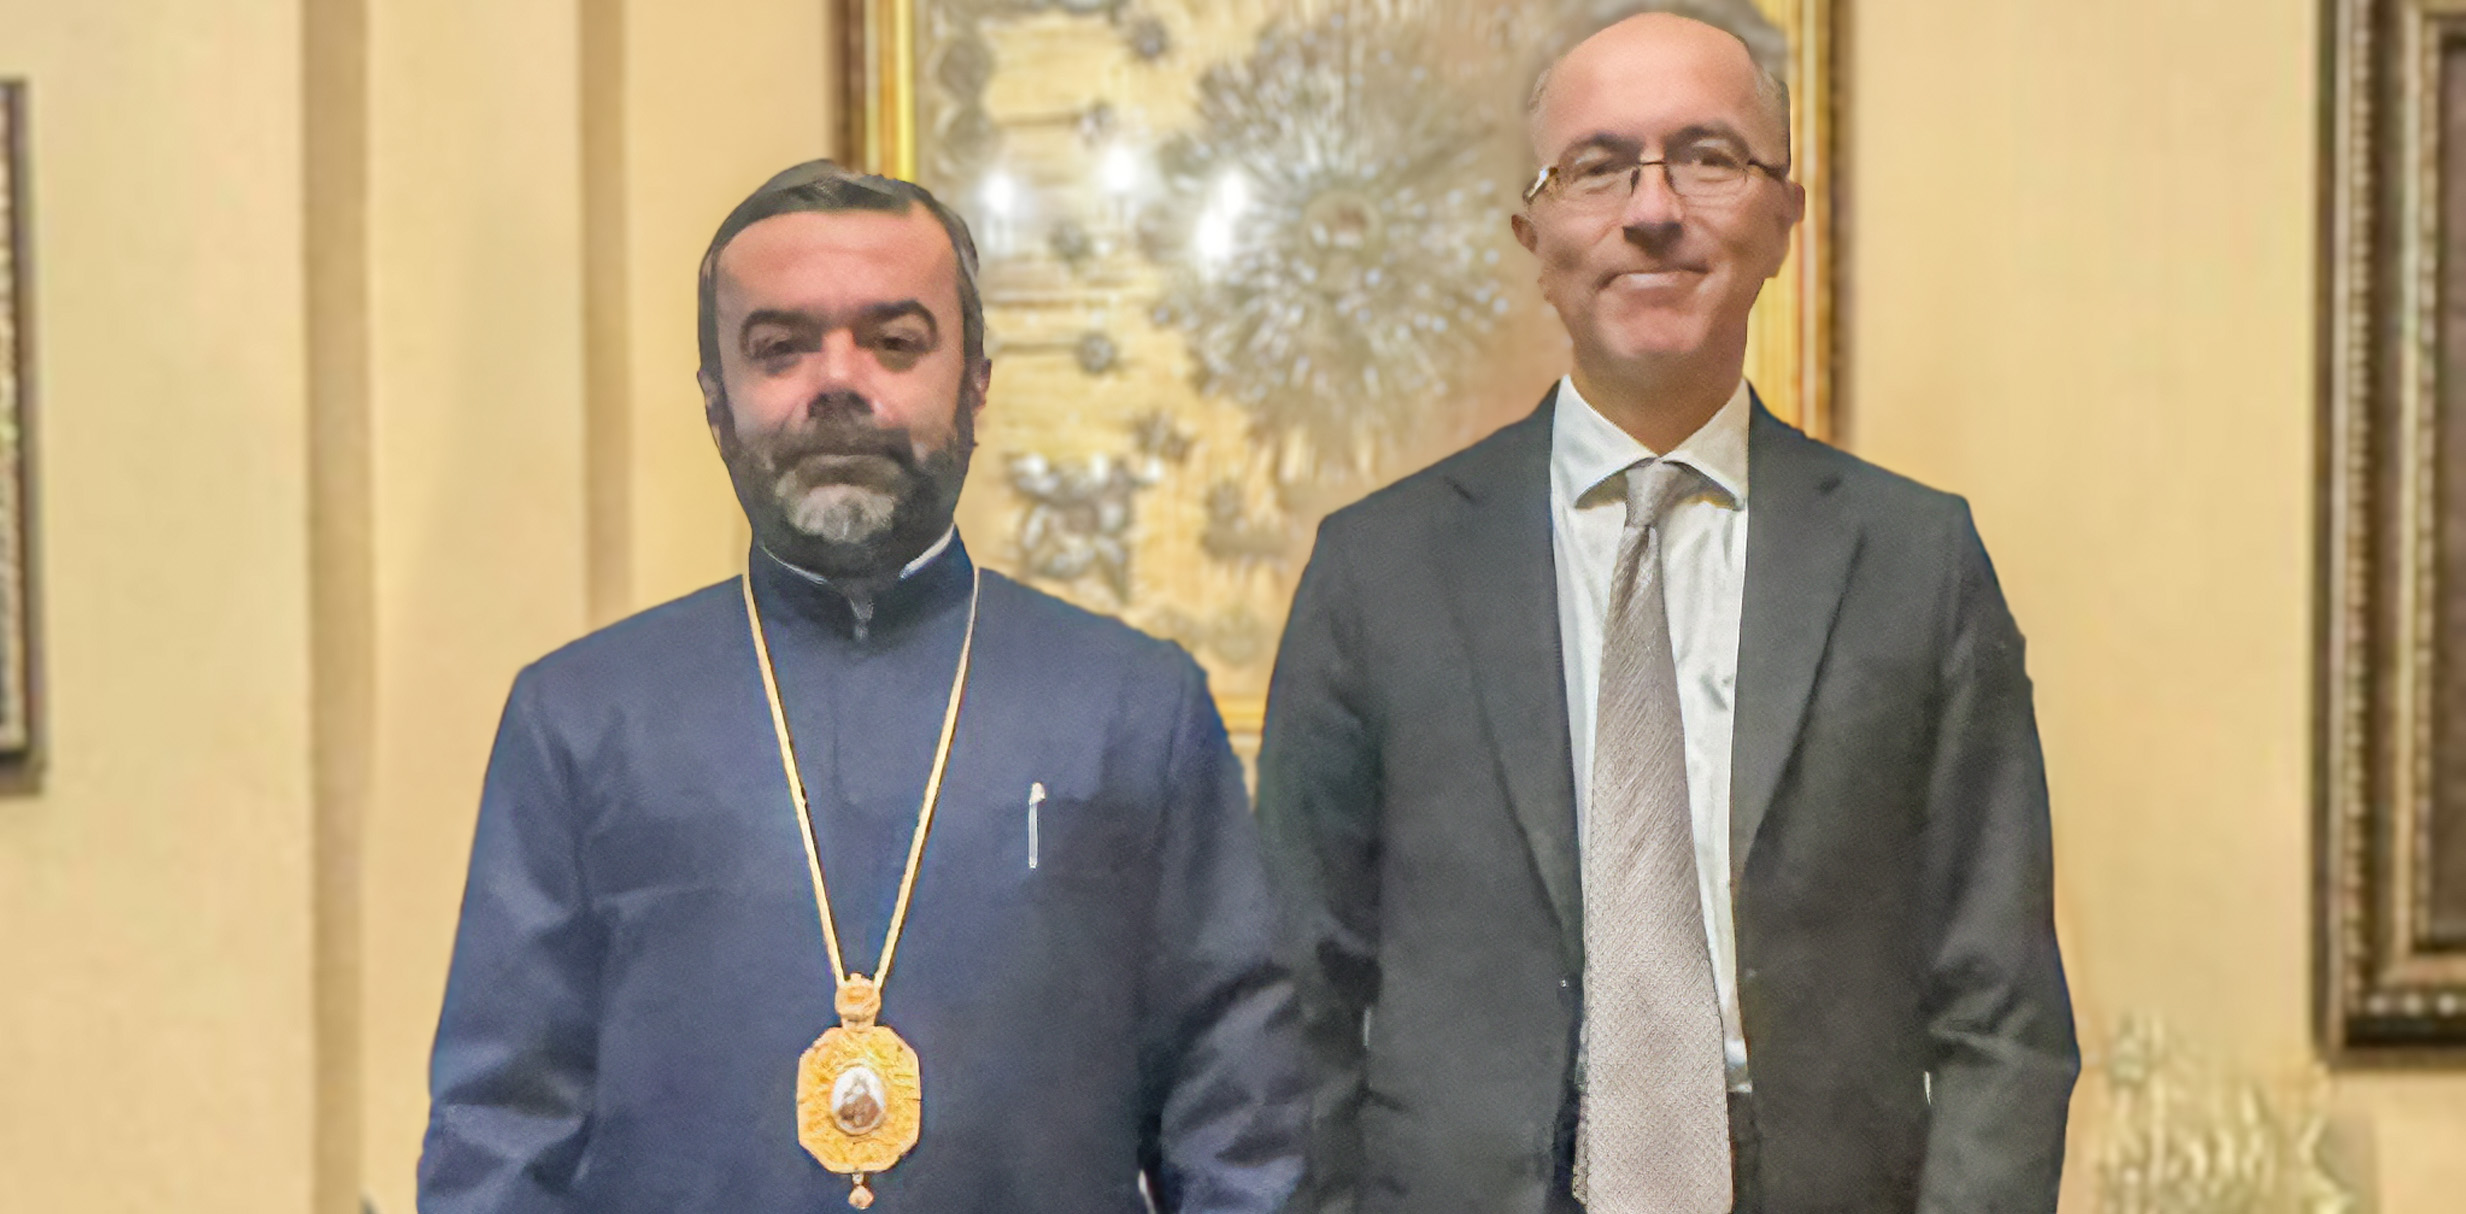 Ambassador of Italy to Georgia hosted at the Armenian Diocese in Georgia